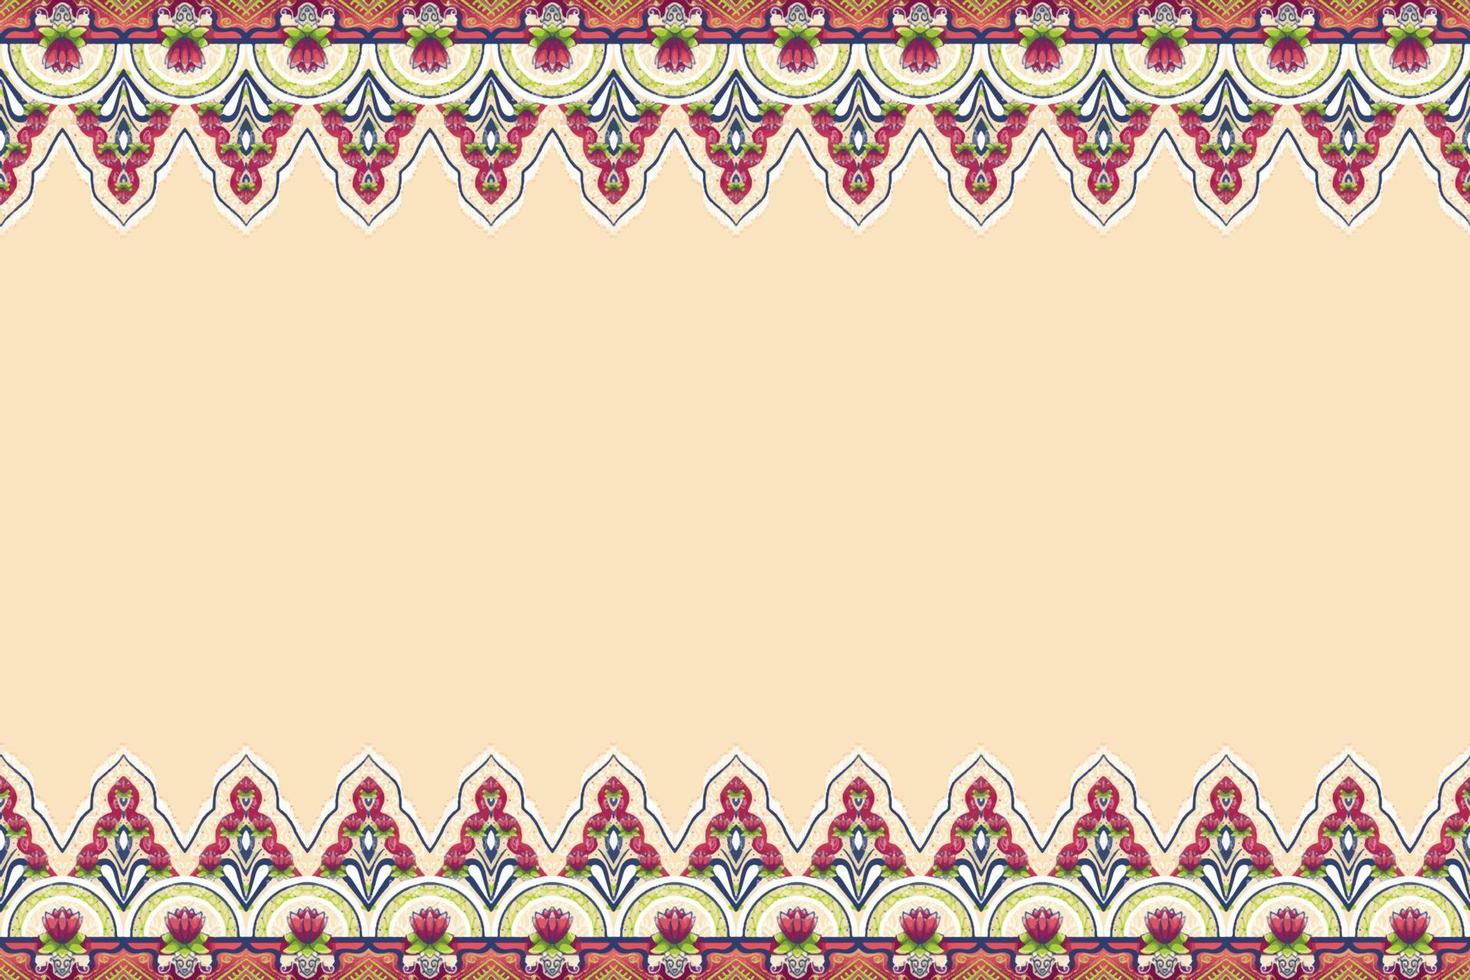 Pink Flower on Ivory Beige, Green, Navy Blue Geometric ethnic oriental pattern traditional Design for background,carpet,wallpaper,clothing,wrapping,Batik,fabric, vector illustration embroidery style